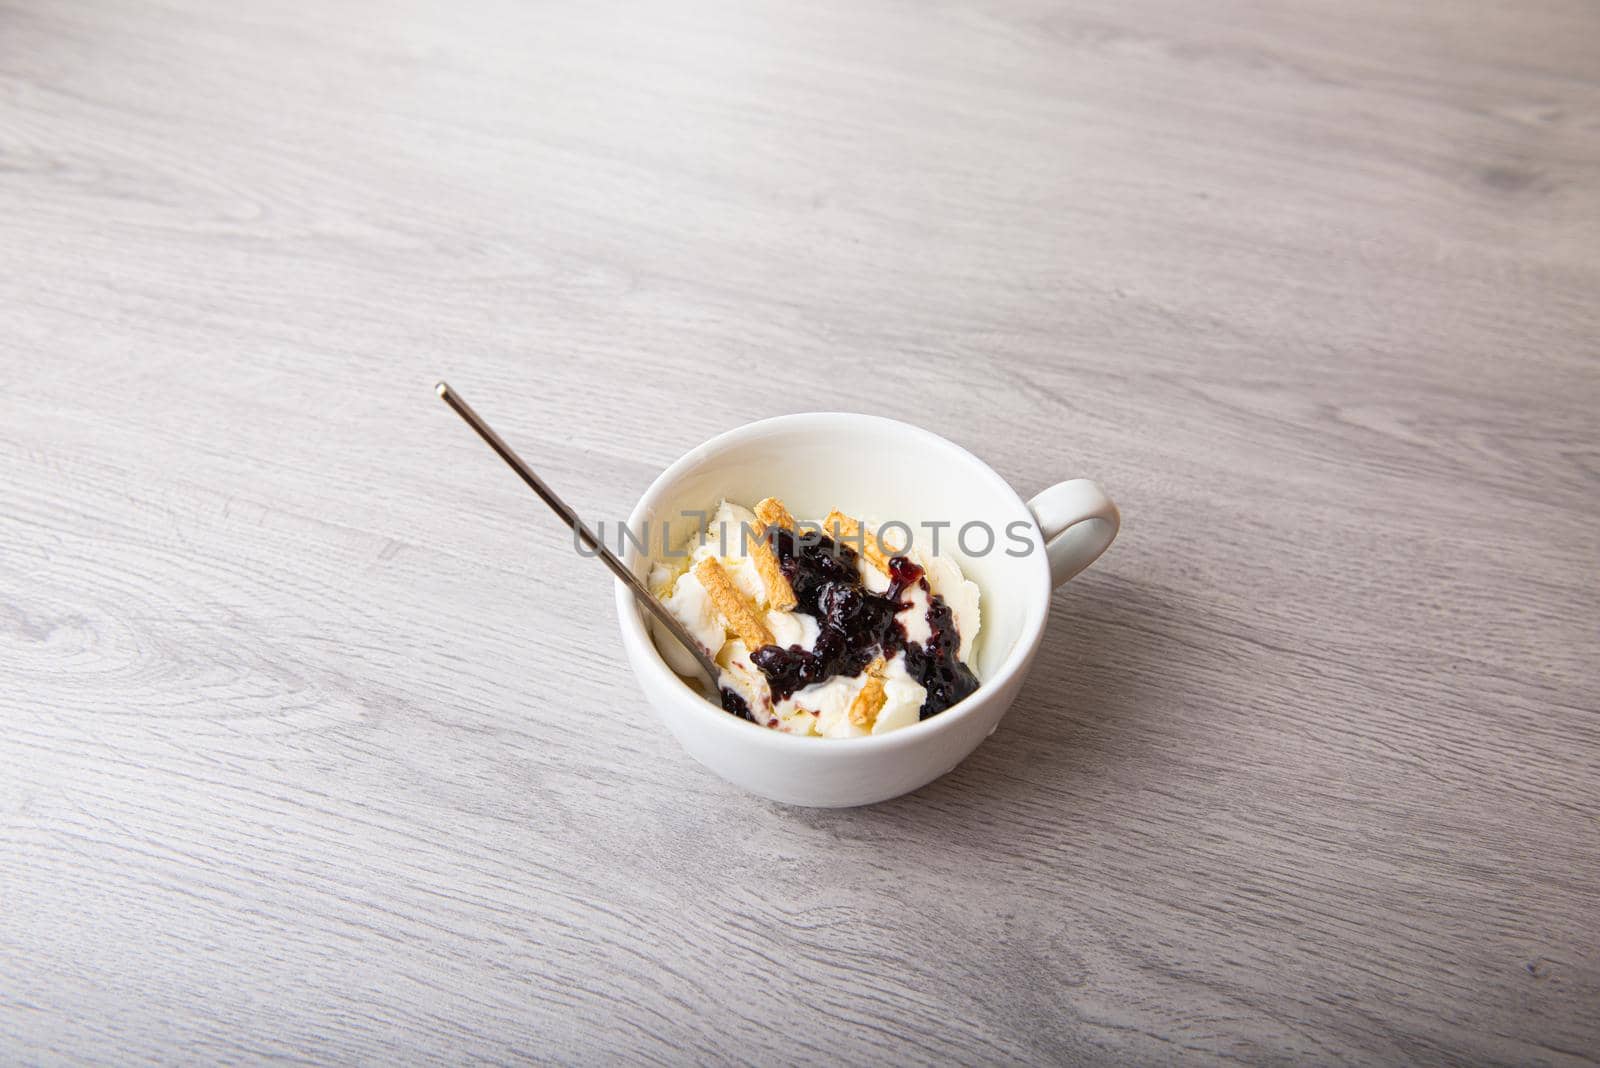 Vanilla ice cream with blackberry jam in a white cup on a wooden light background by marynkin